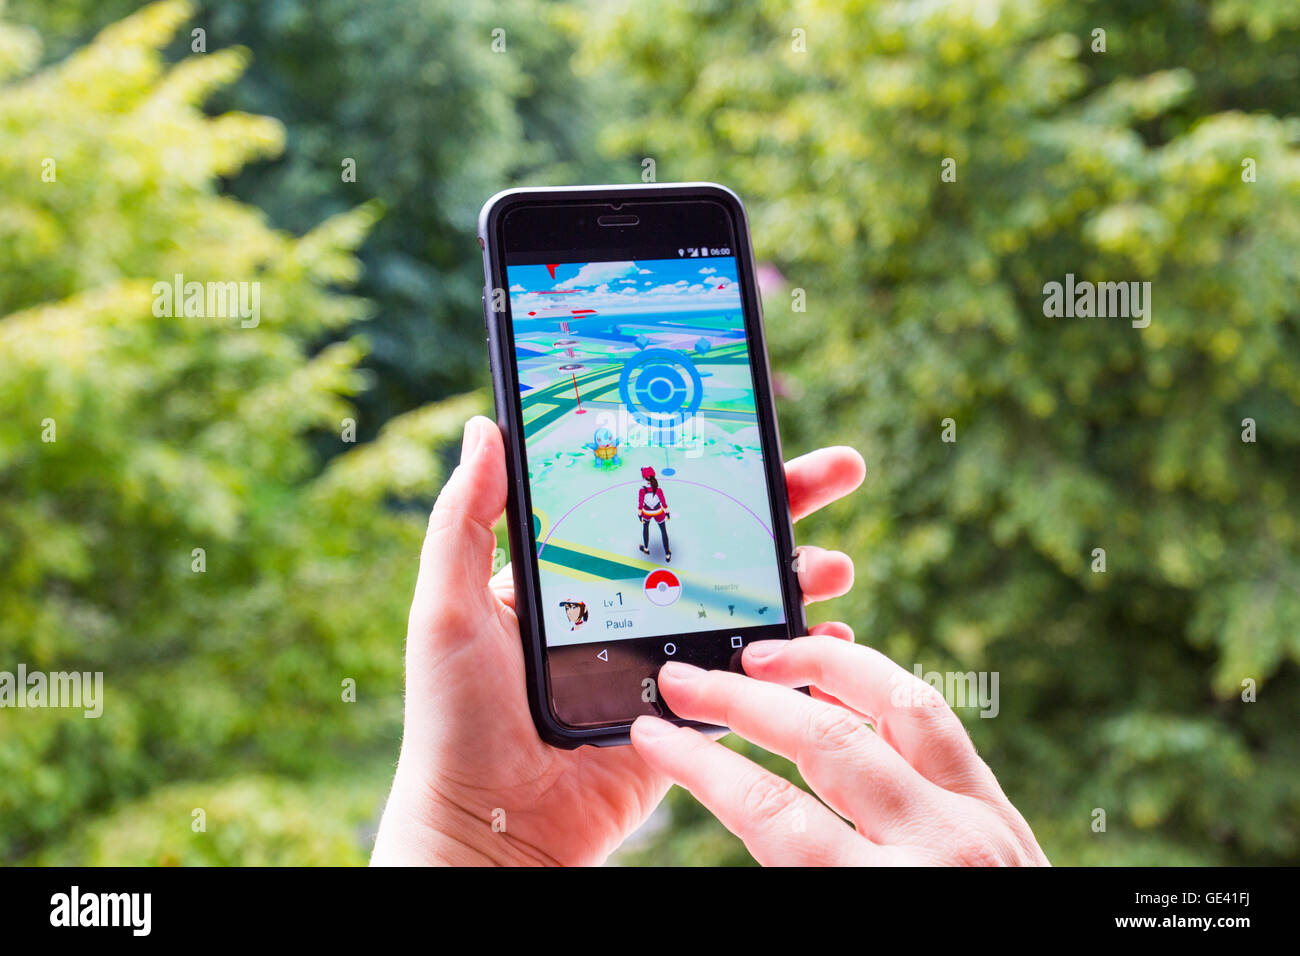 Apple iPhone6 Plus held in one hand showing its screen with Pokemon Go application. Stock Photo